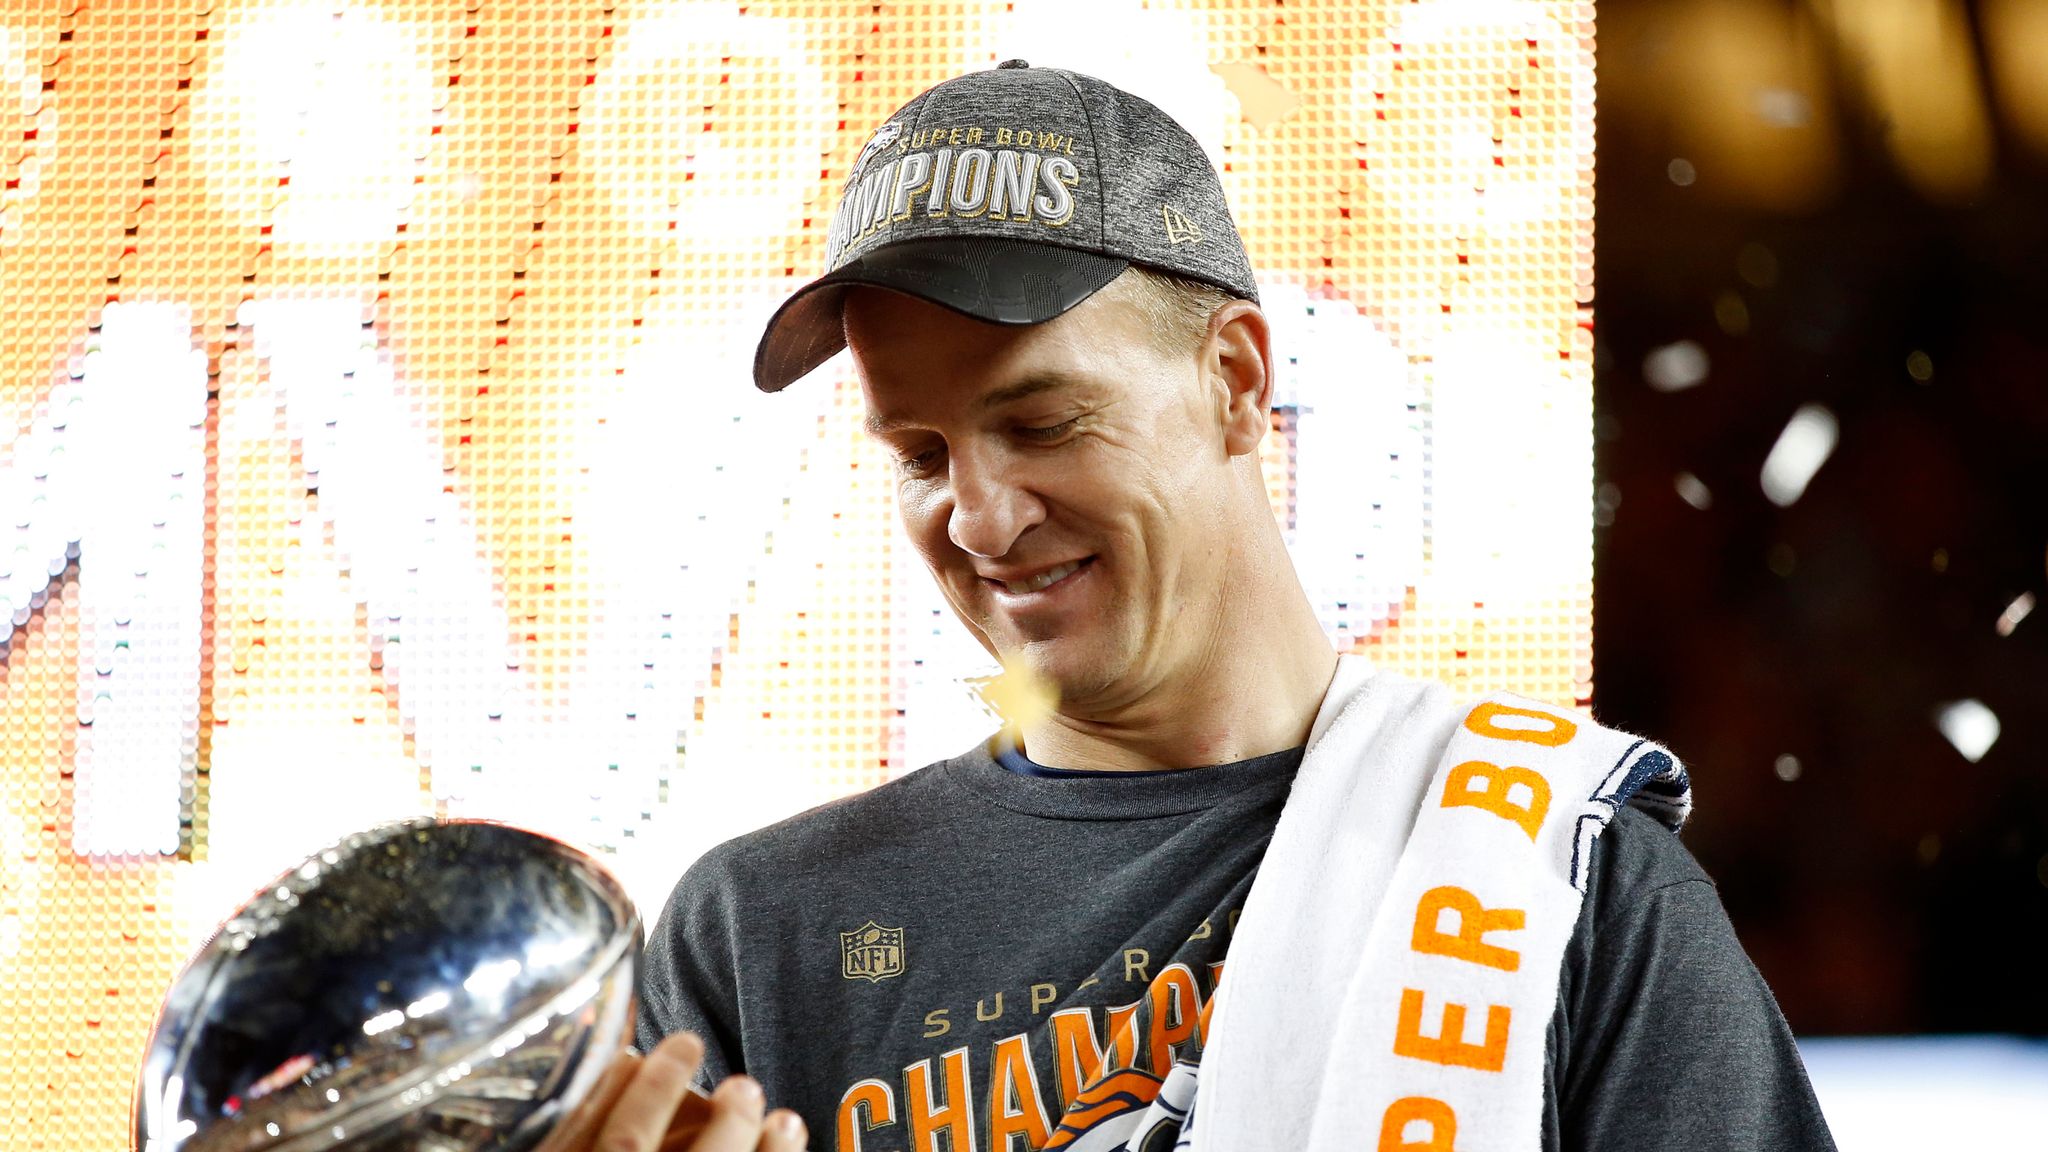 Super Bowl 50: Peyton Manning says he and Eli don't compare rings